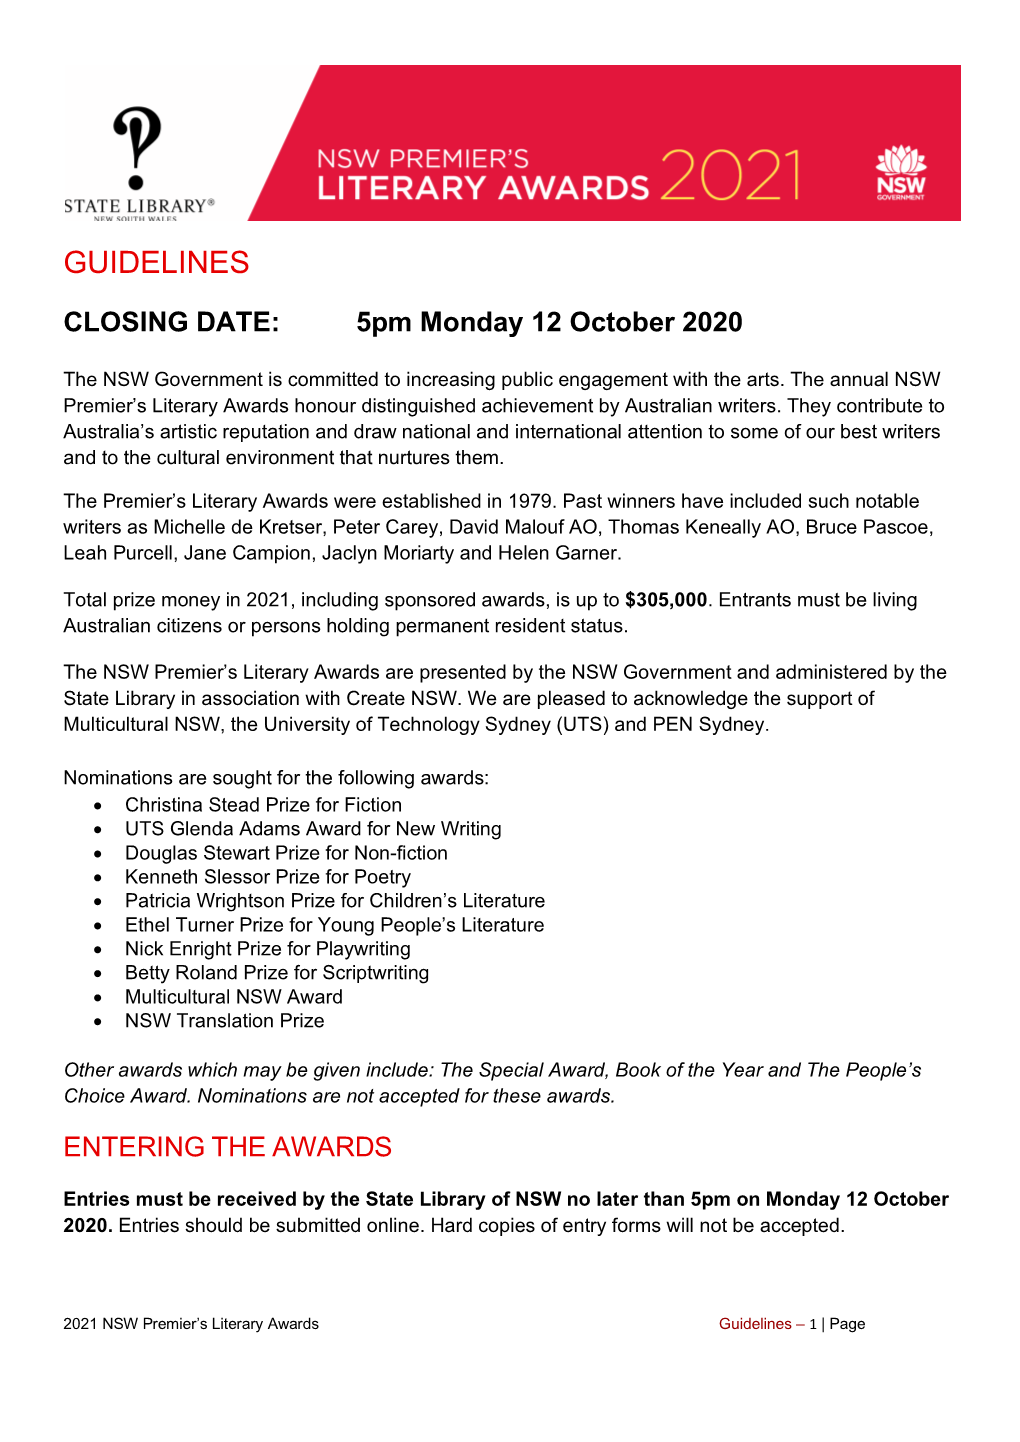 2021 NSW Premier's Literary Awards Guidelines